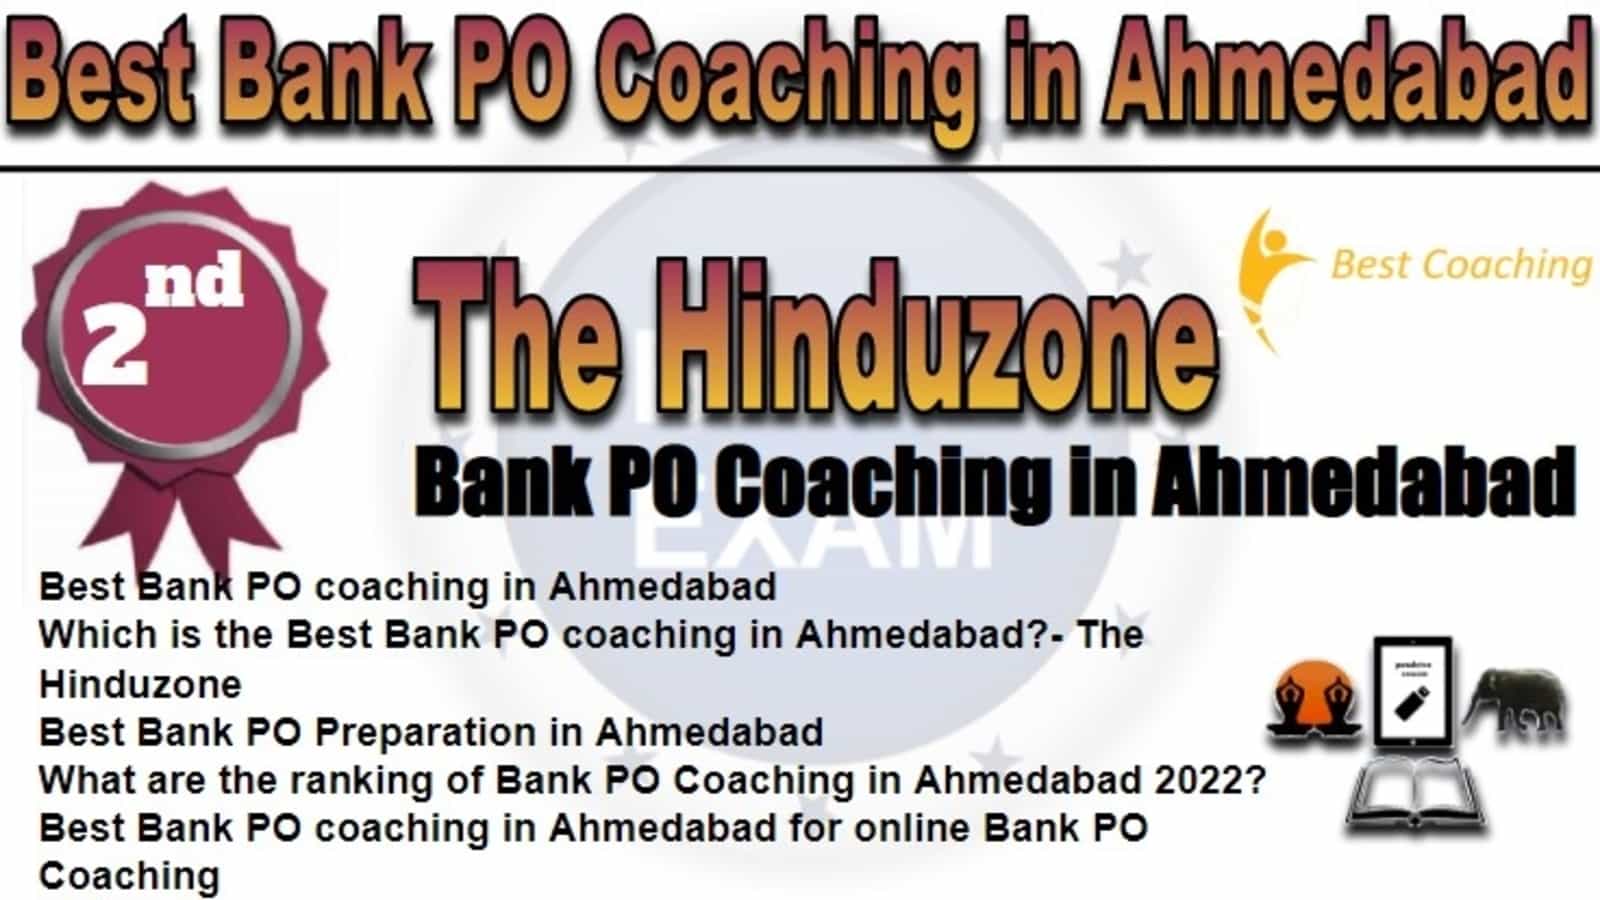 Rank 2 Best Bank PO Coaching in Ahmedabad